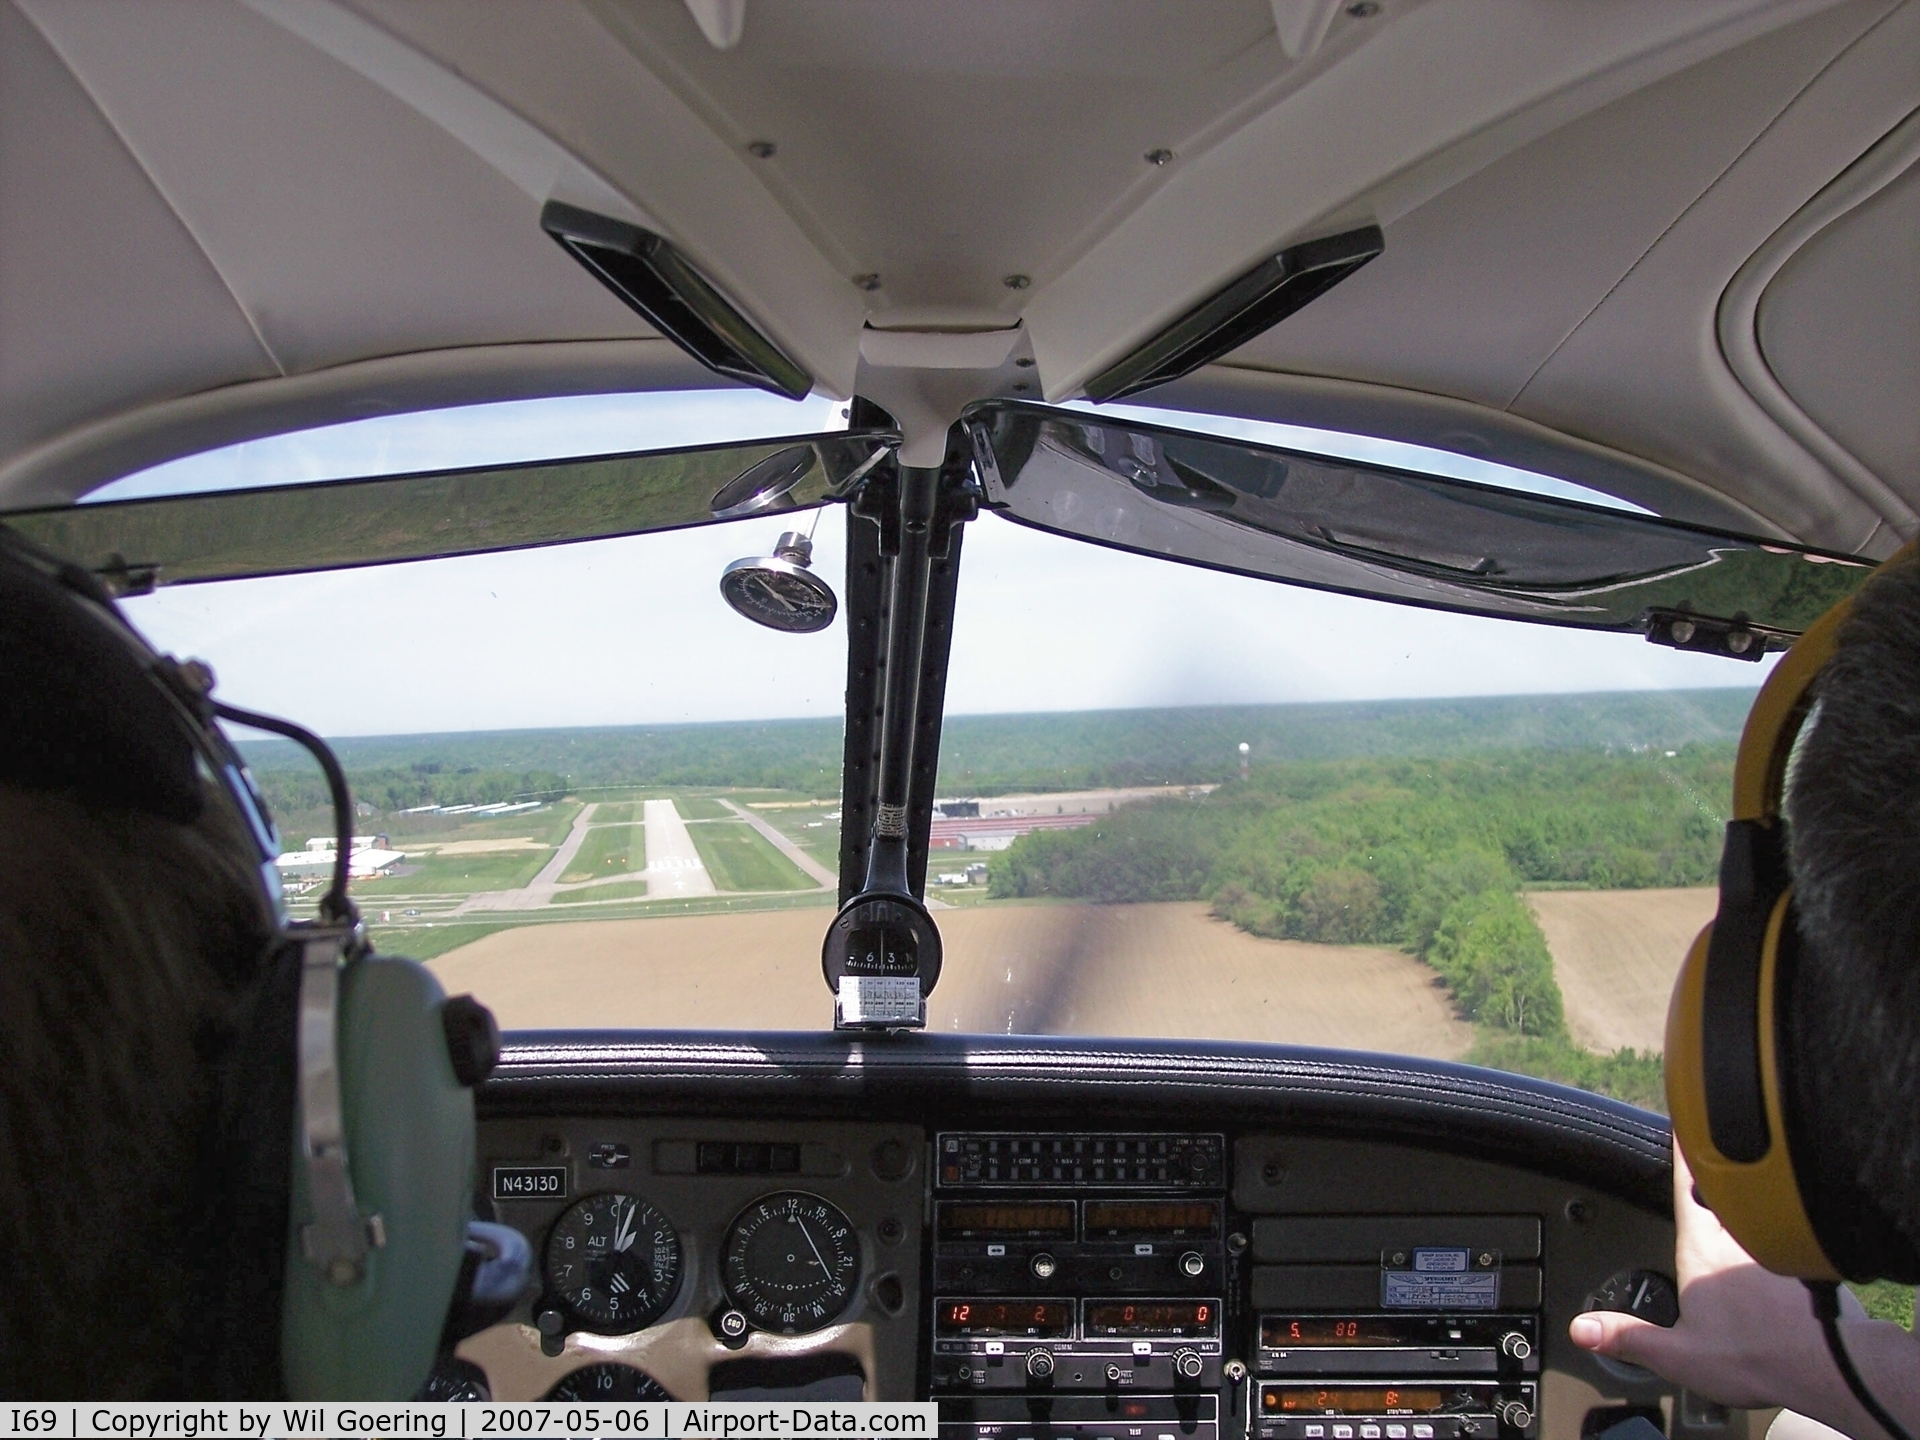 Clermont County Airport (I69) - On Final